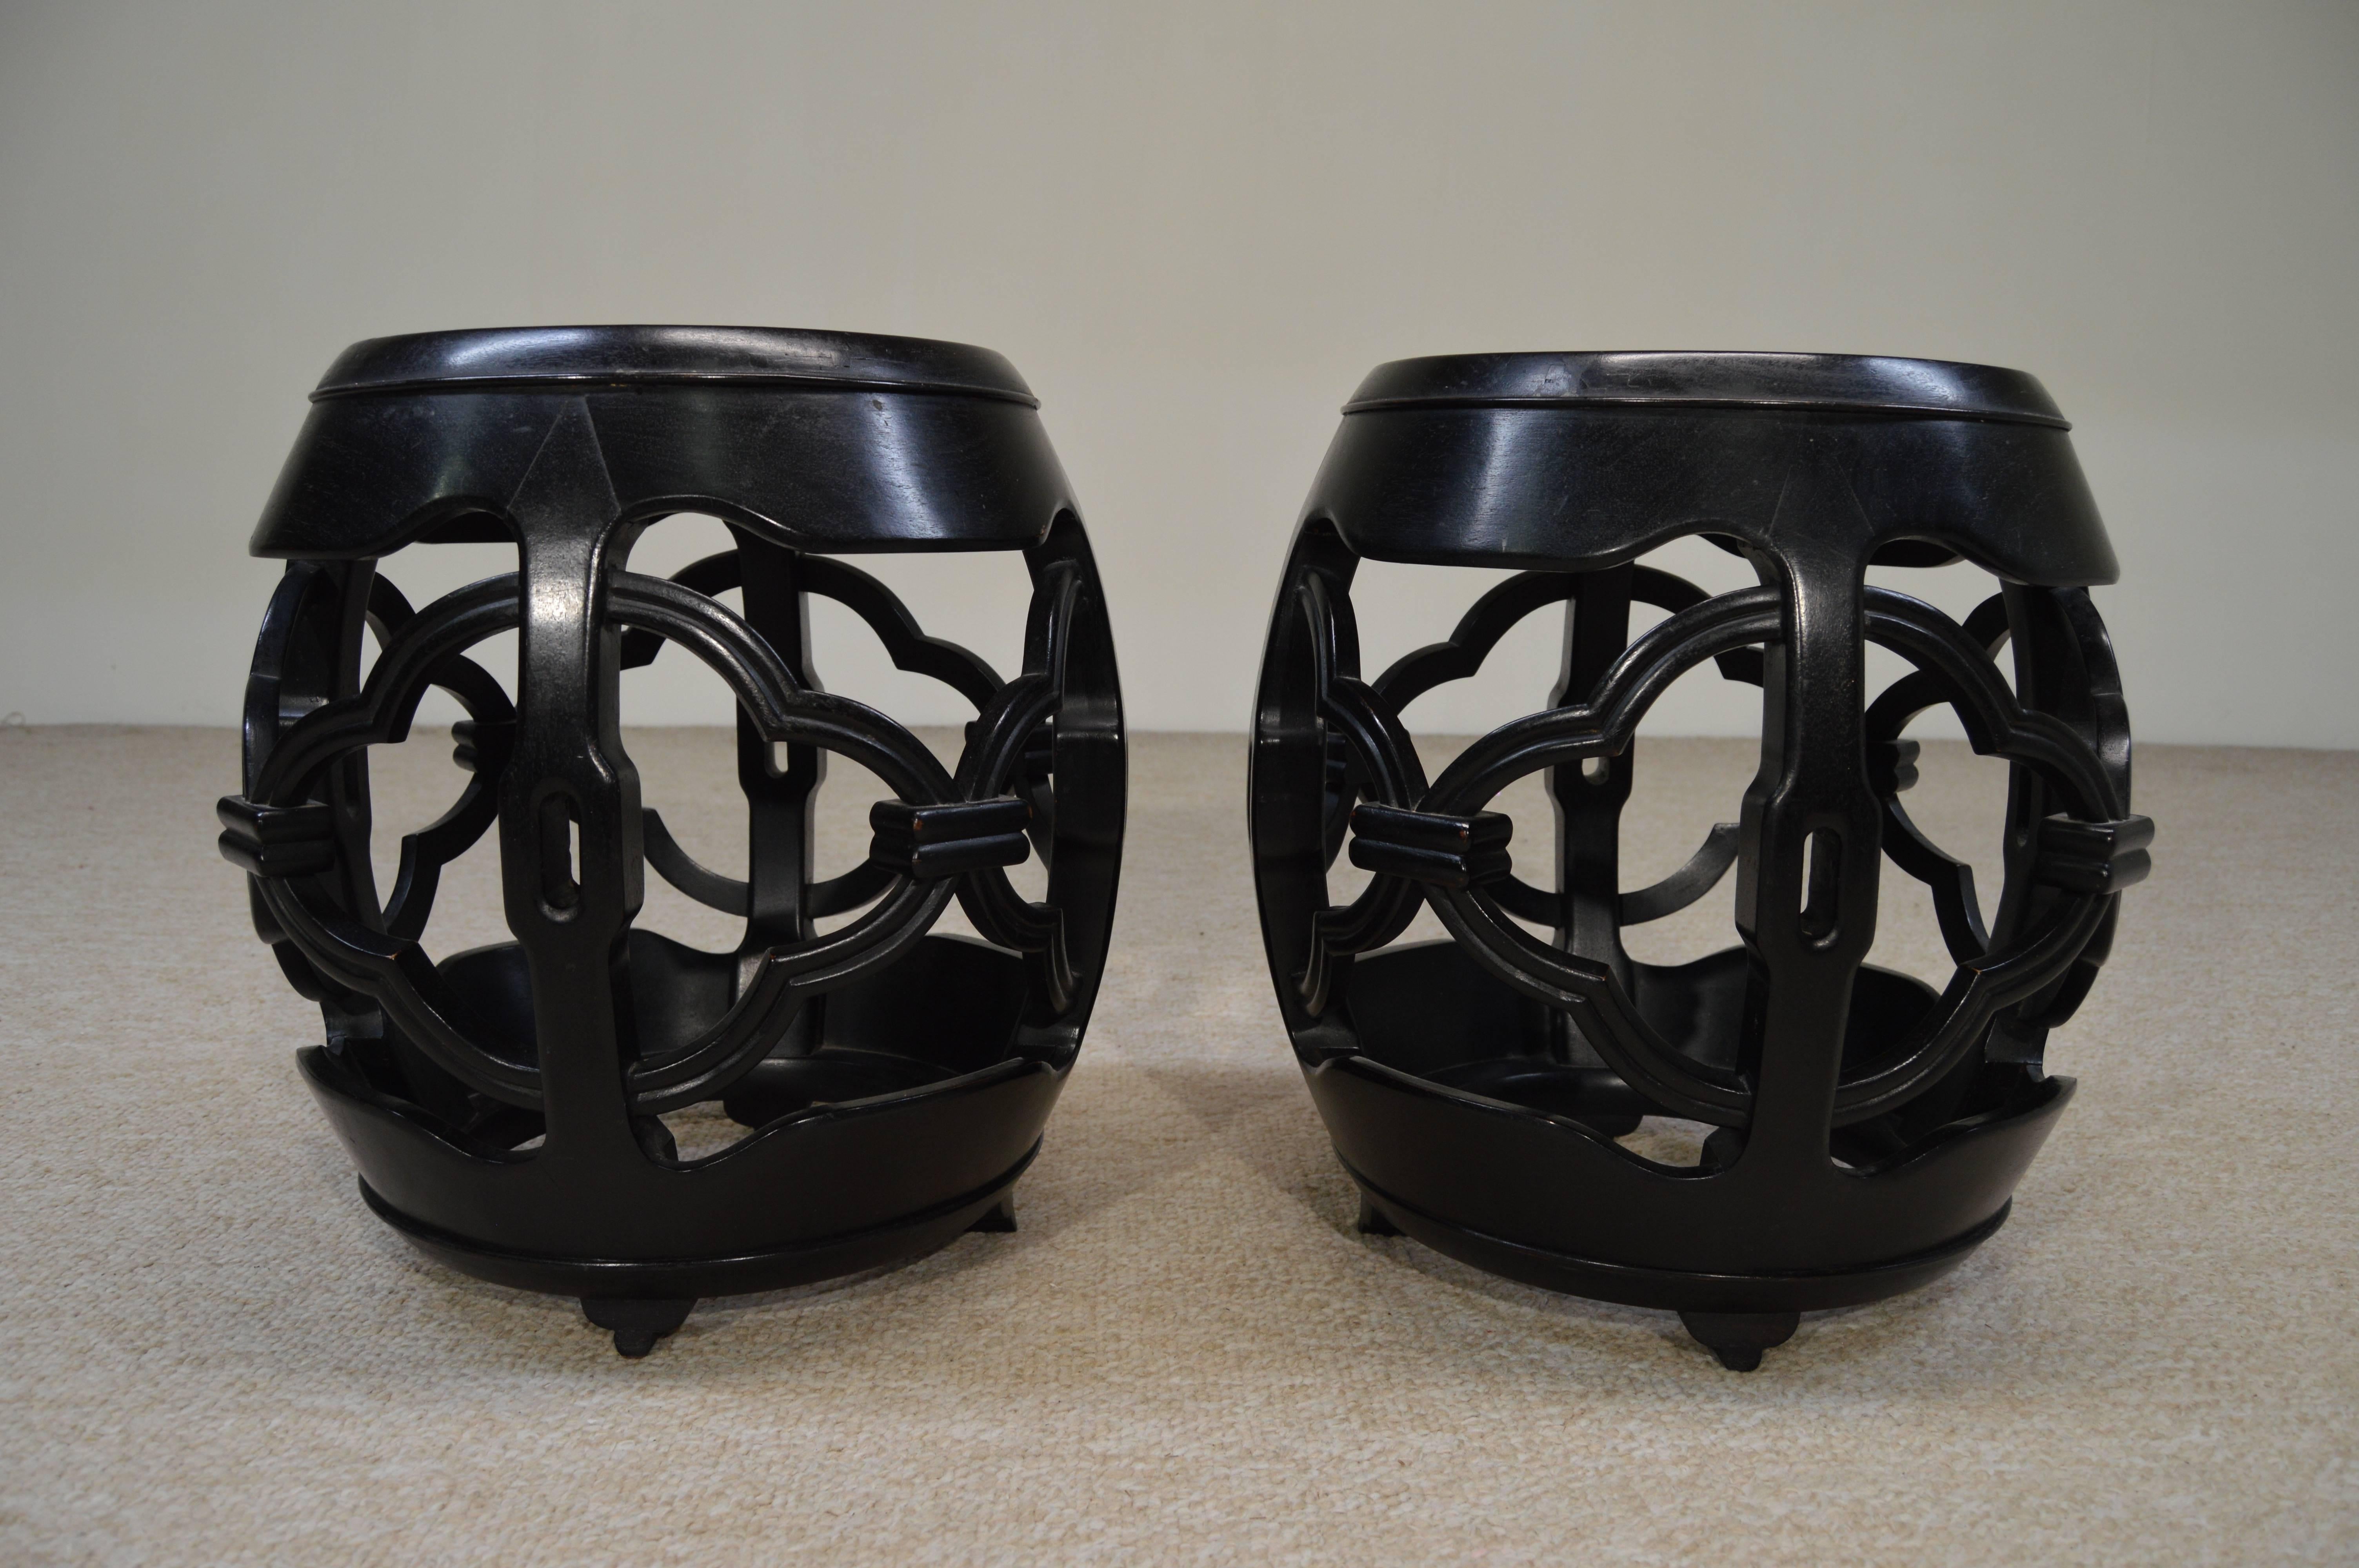 Beautifully hand-carved ebony barrel drum bases with inlaid Carrara marble tops. This eye catching pair will stun anyone who enters the room. Every time I'm in the warehouse I can not help but glance over at these. They are so beautiful. 
Marble